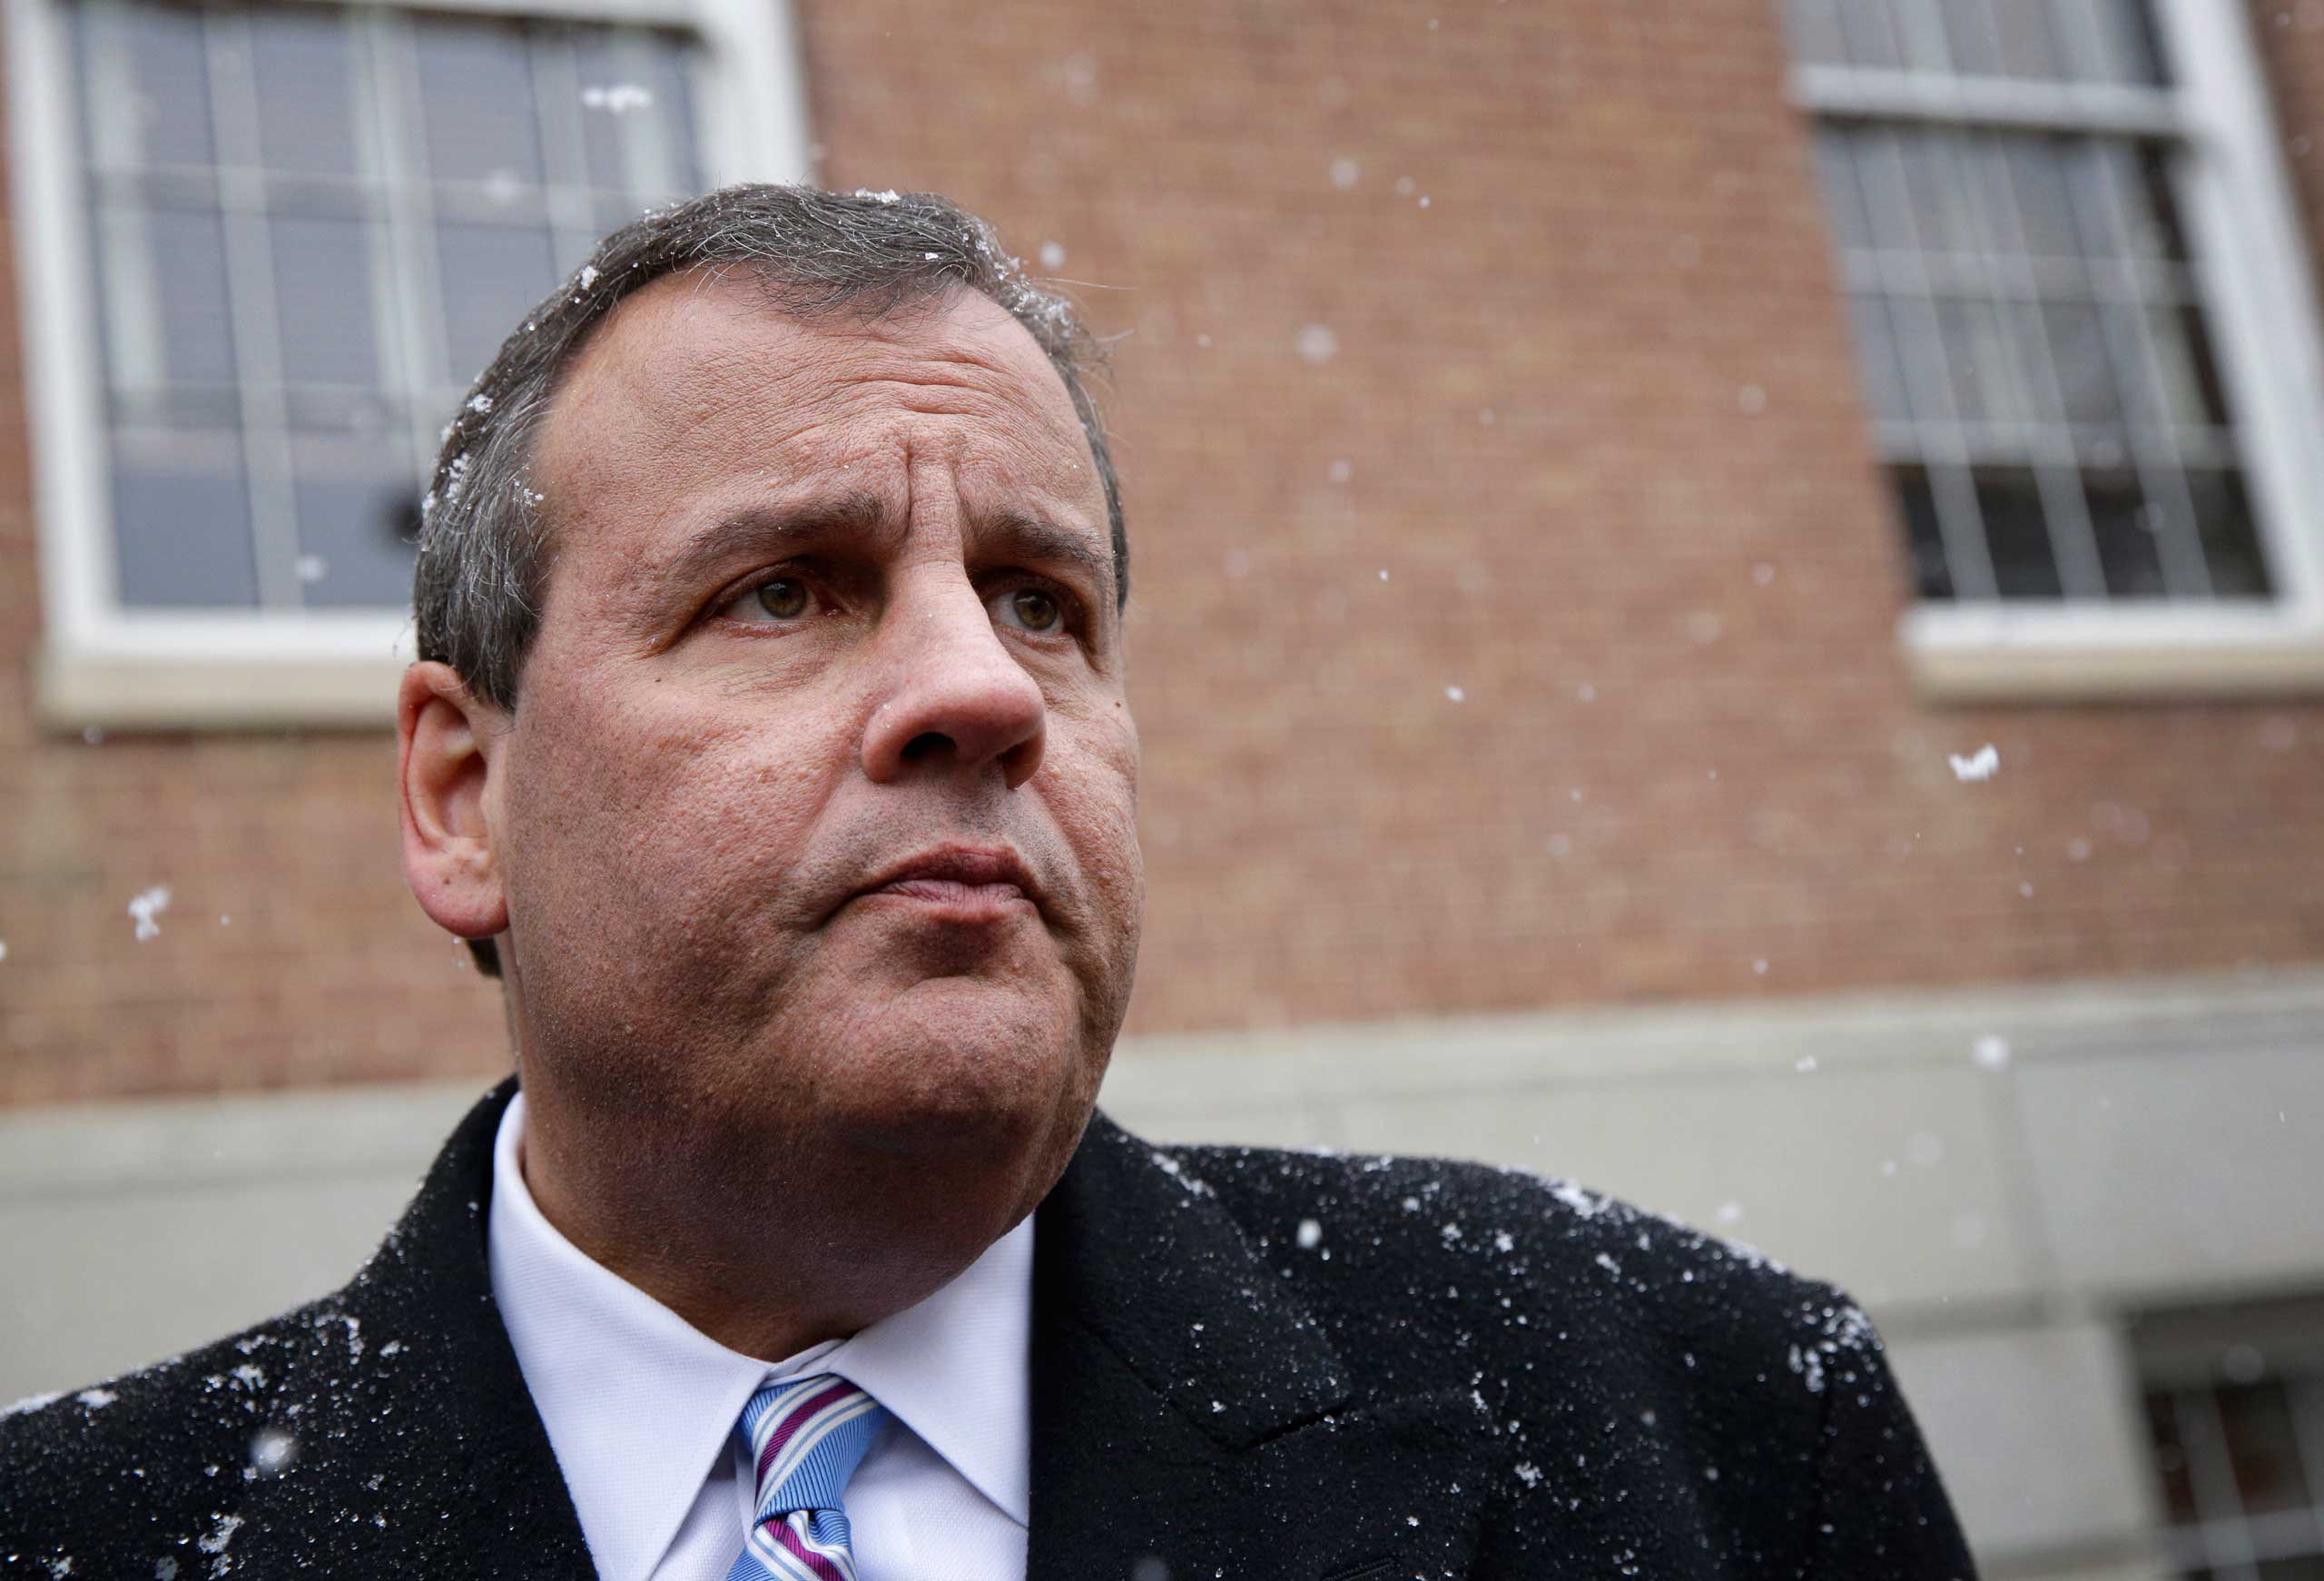 New Jersey Gov. Chris Christie speaks with reporters as he leaves an inaugural ceremony for Maryland Gov. Larry Hogan in Annapolis, Md. on Jan. 21, 2015. (Patrick Semansky—AP)